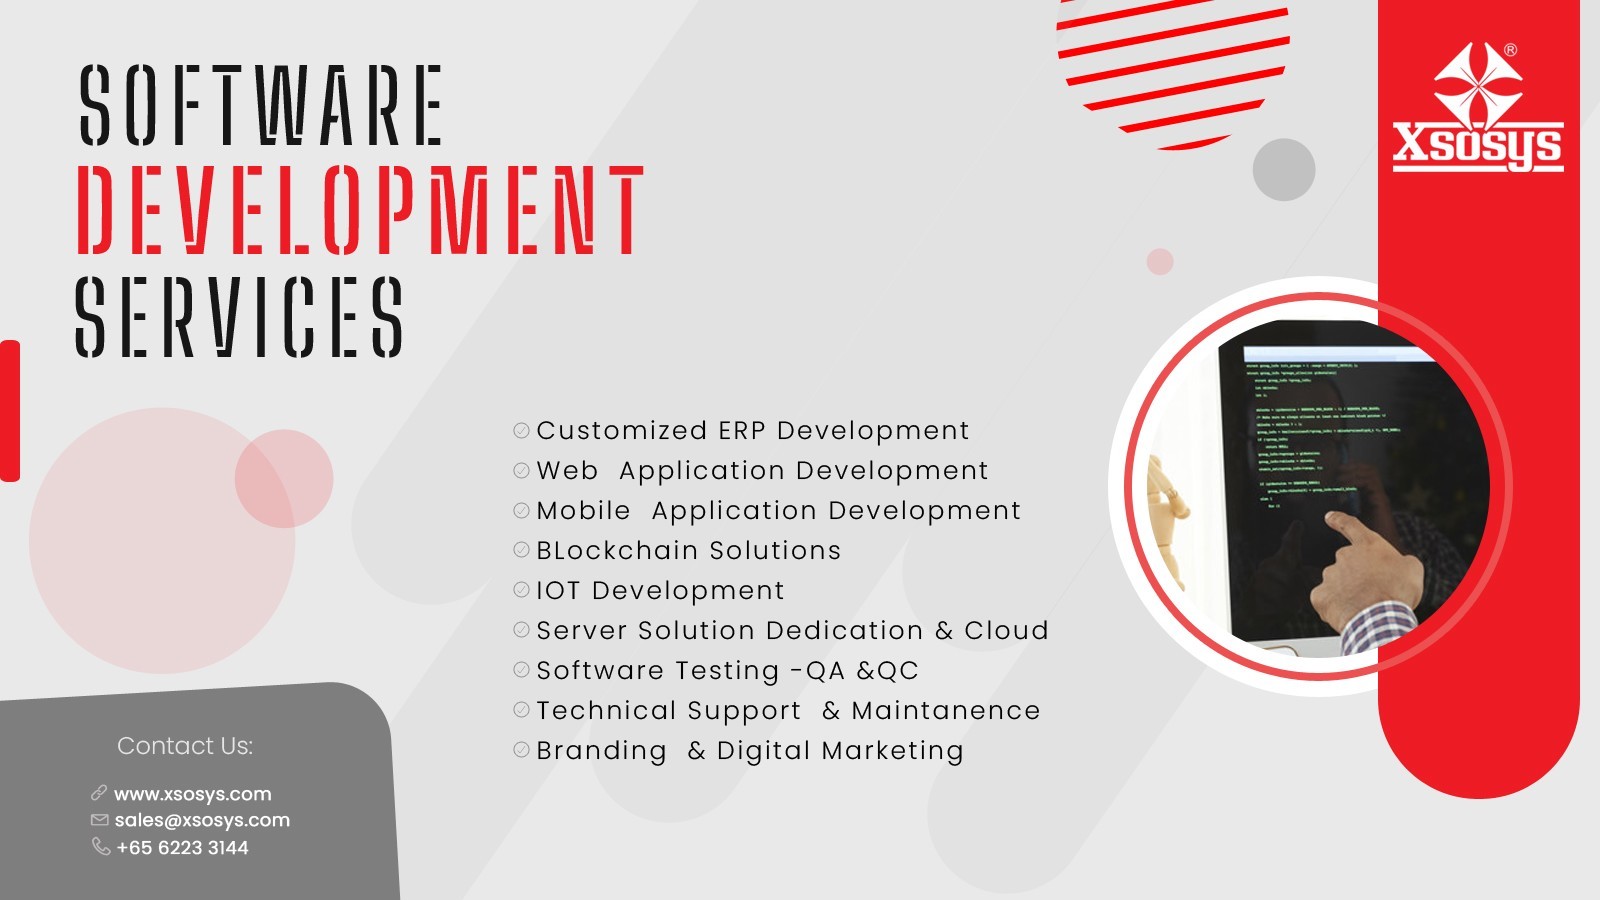 Software Development Services in Singapore